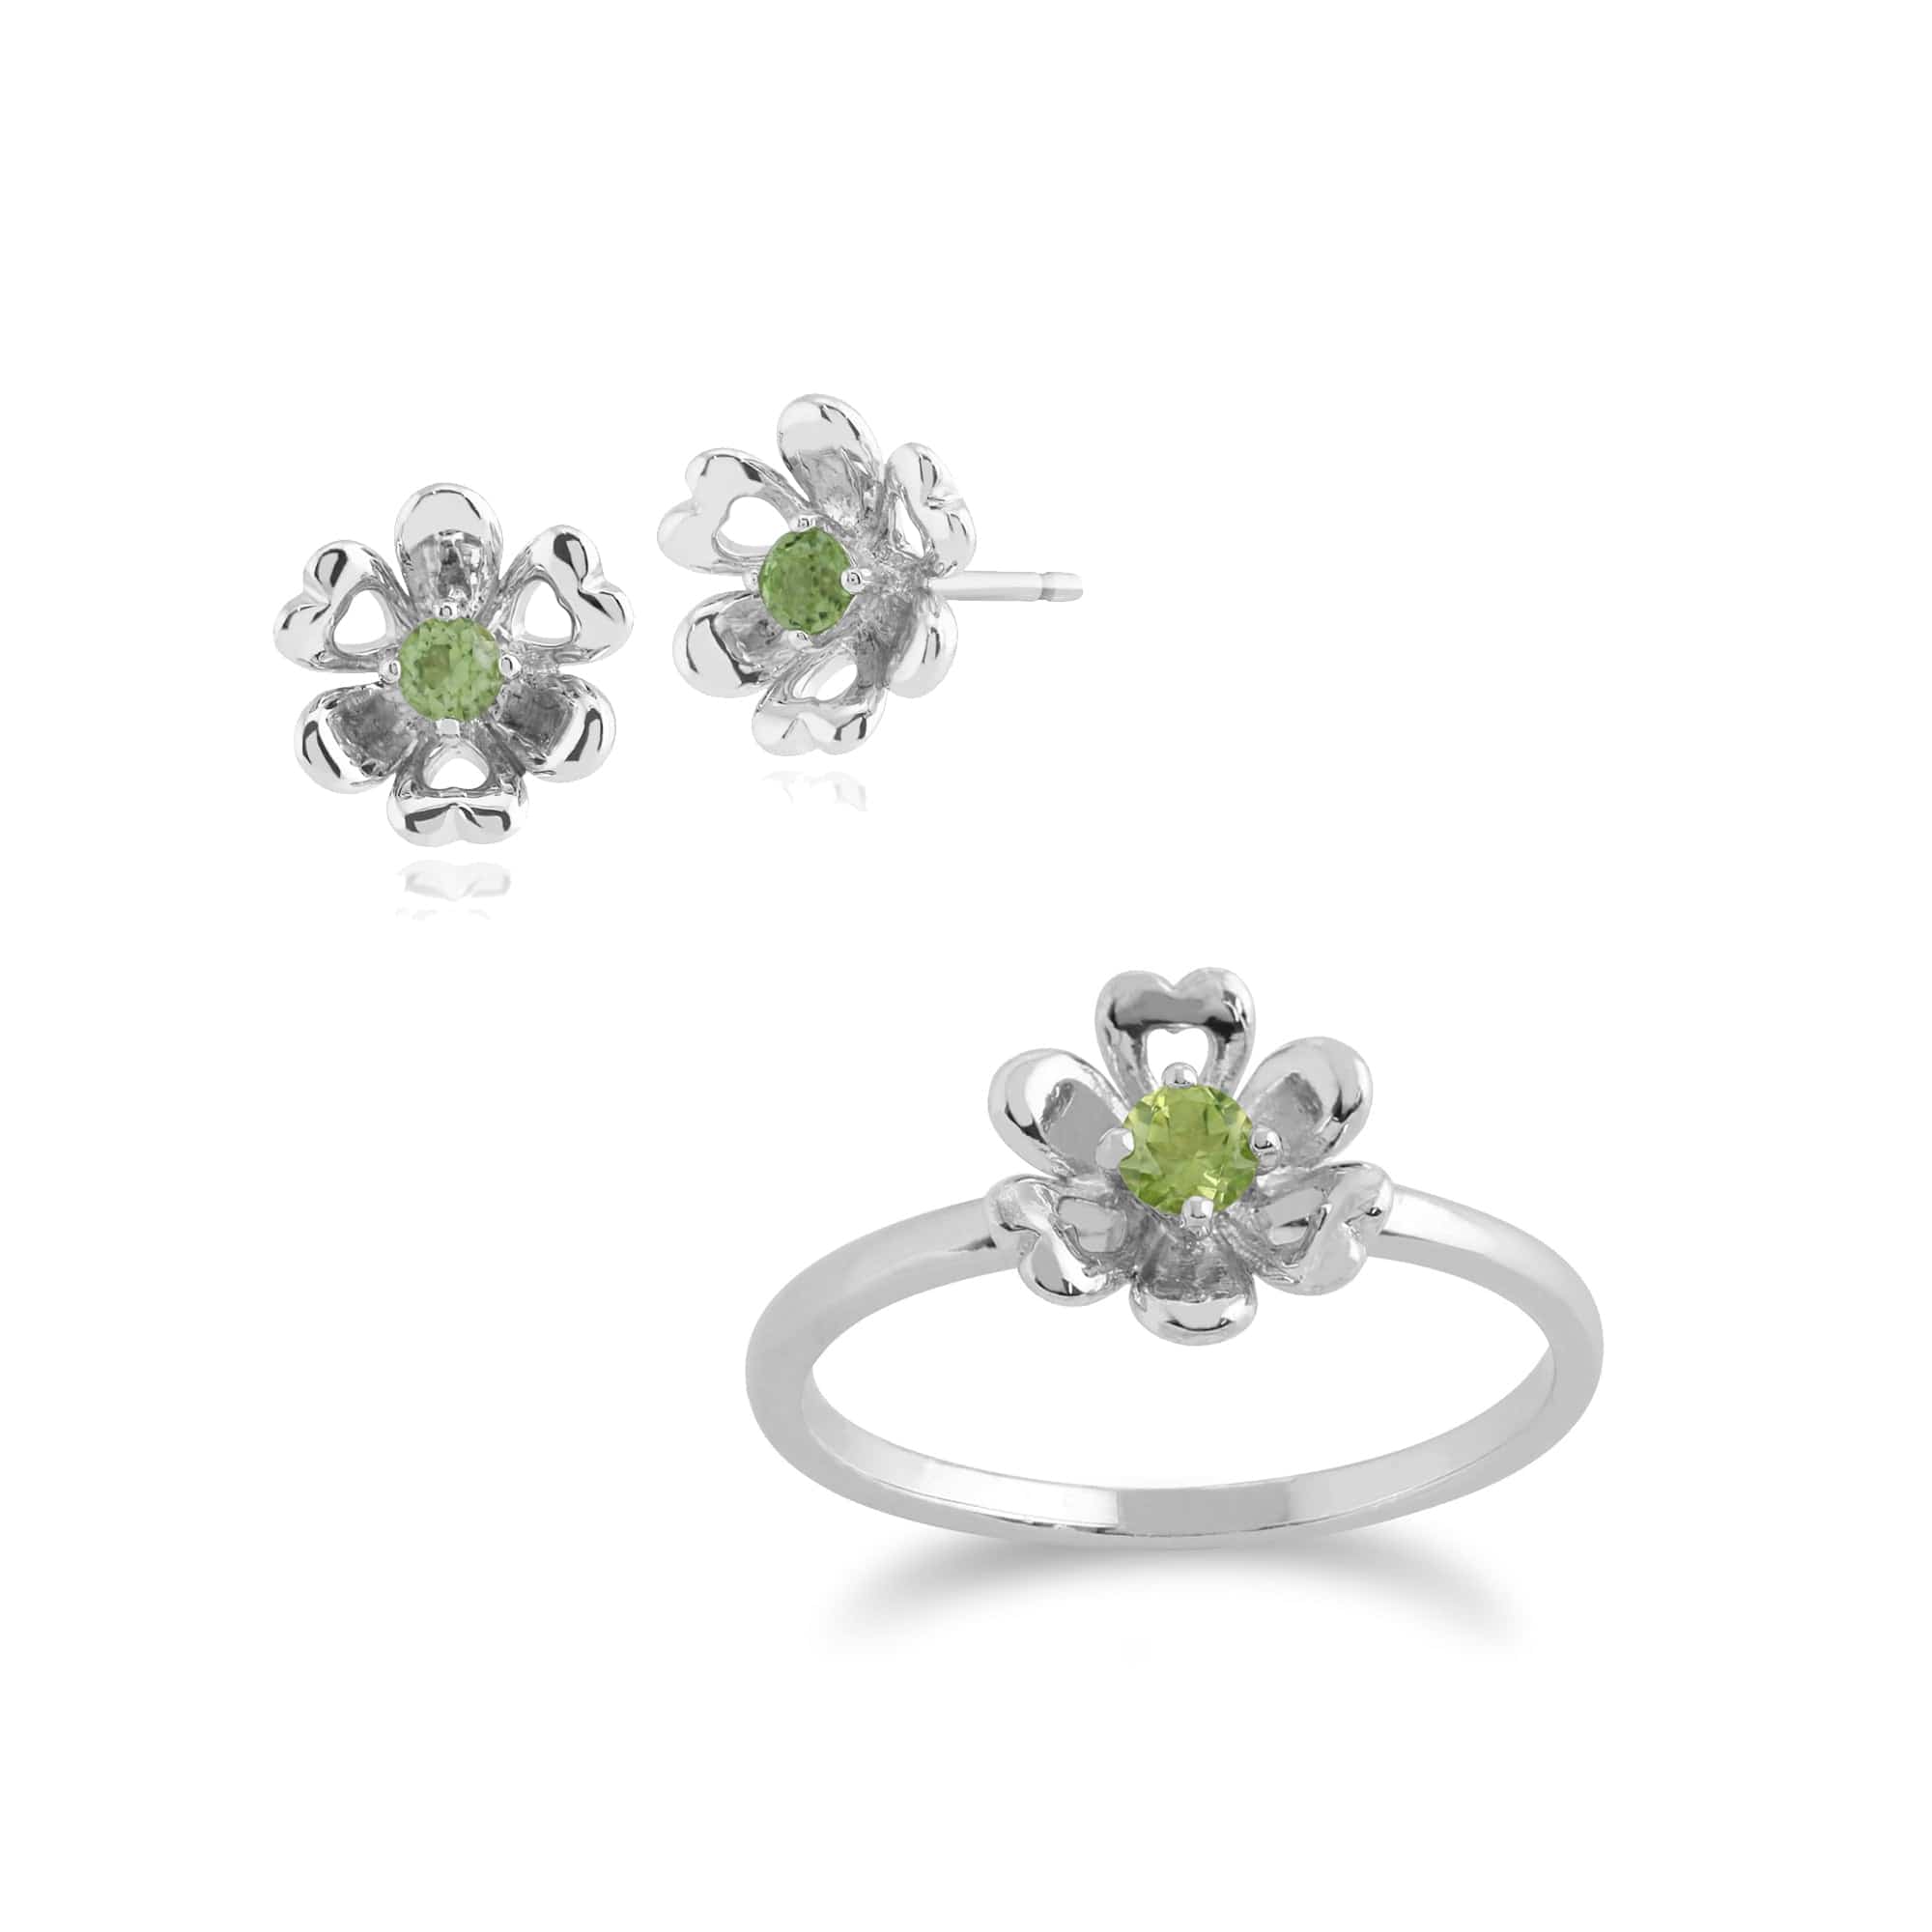 270E020301925-270R048401925 Floral Round Peridot Daisy Flower Stud Earrings & Ring Set 1